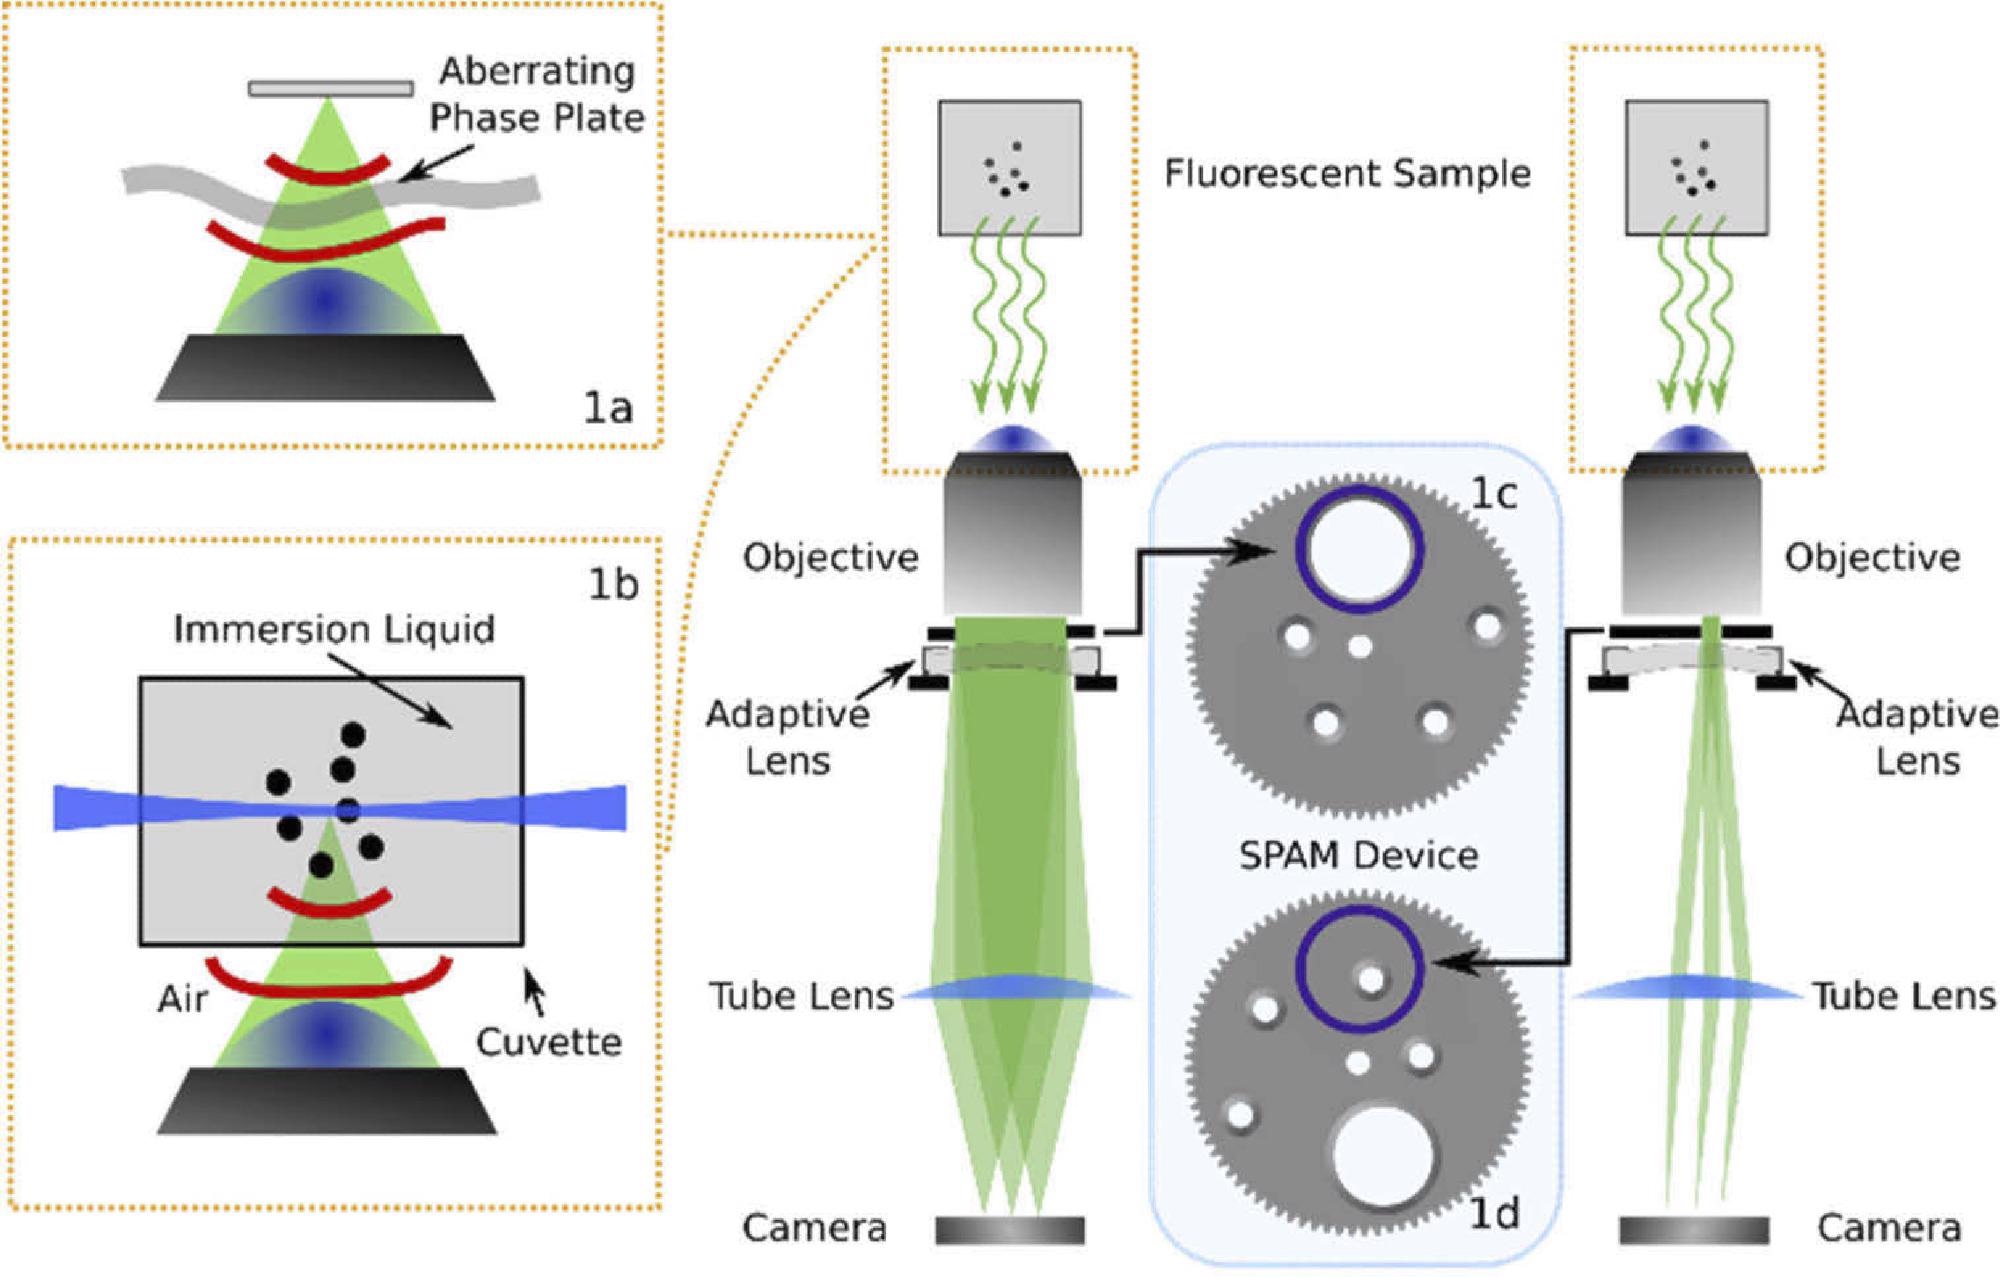 Optical layout of the imaging system used in this experiment including the SPAM module in combination with an adaptive lens. The diagram shows the SPAM module in the full pupil position (c) and in the sub-pupil position (d). The microscope has been used in widefield (a) and light sheet microscopy (b) configurations, as illustrated in the insets.